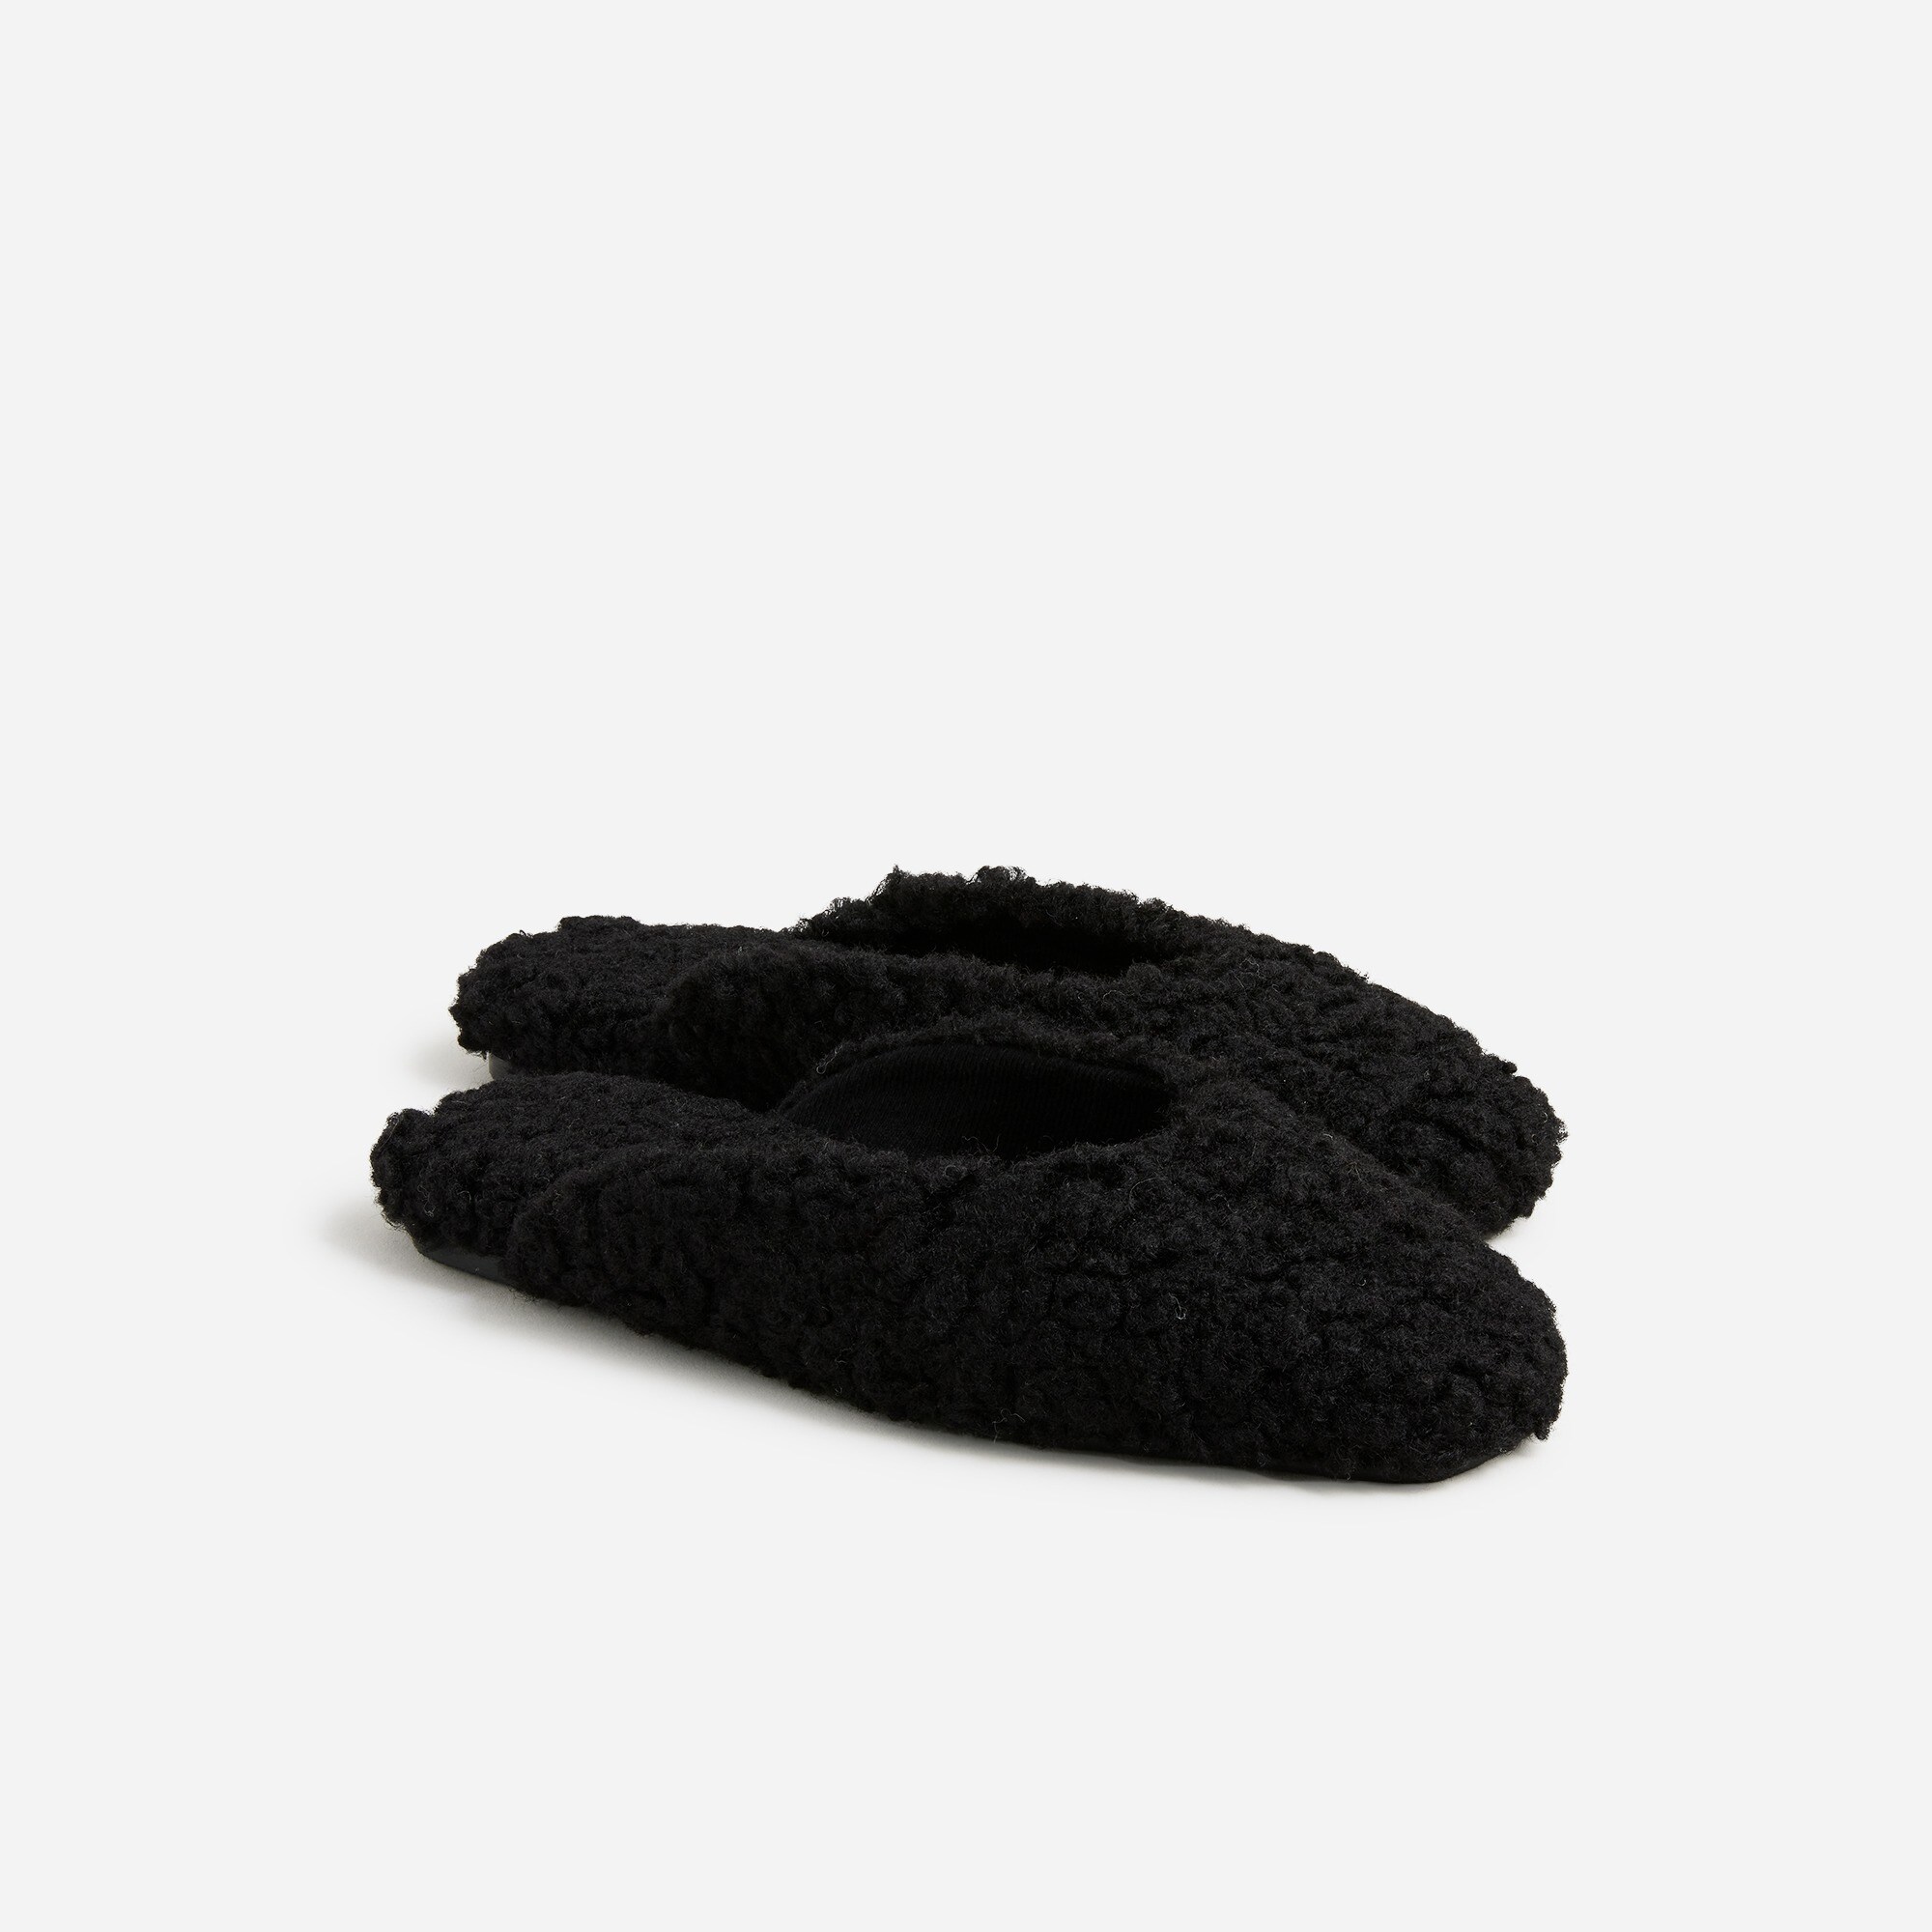  House slippers in sherpa